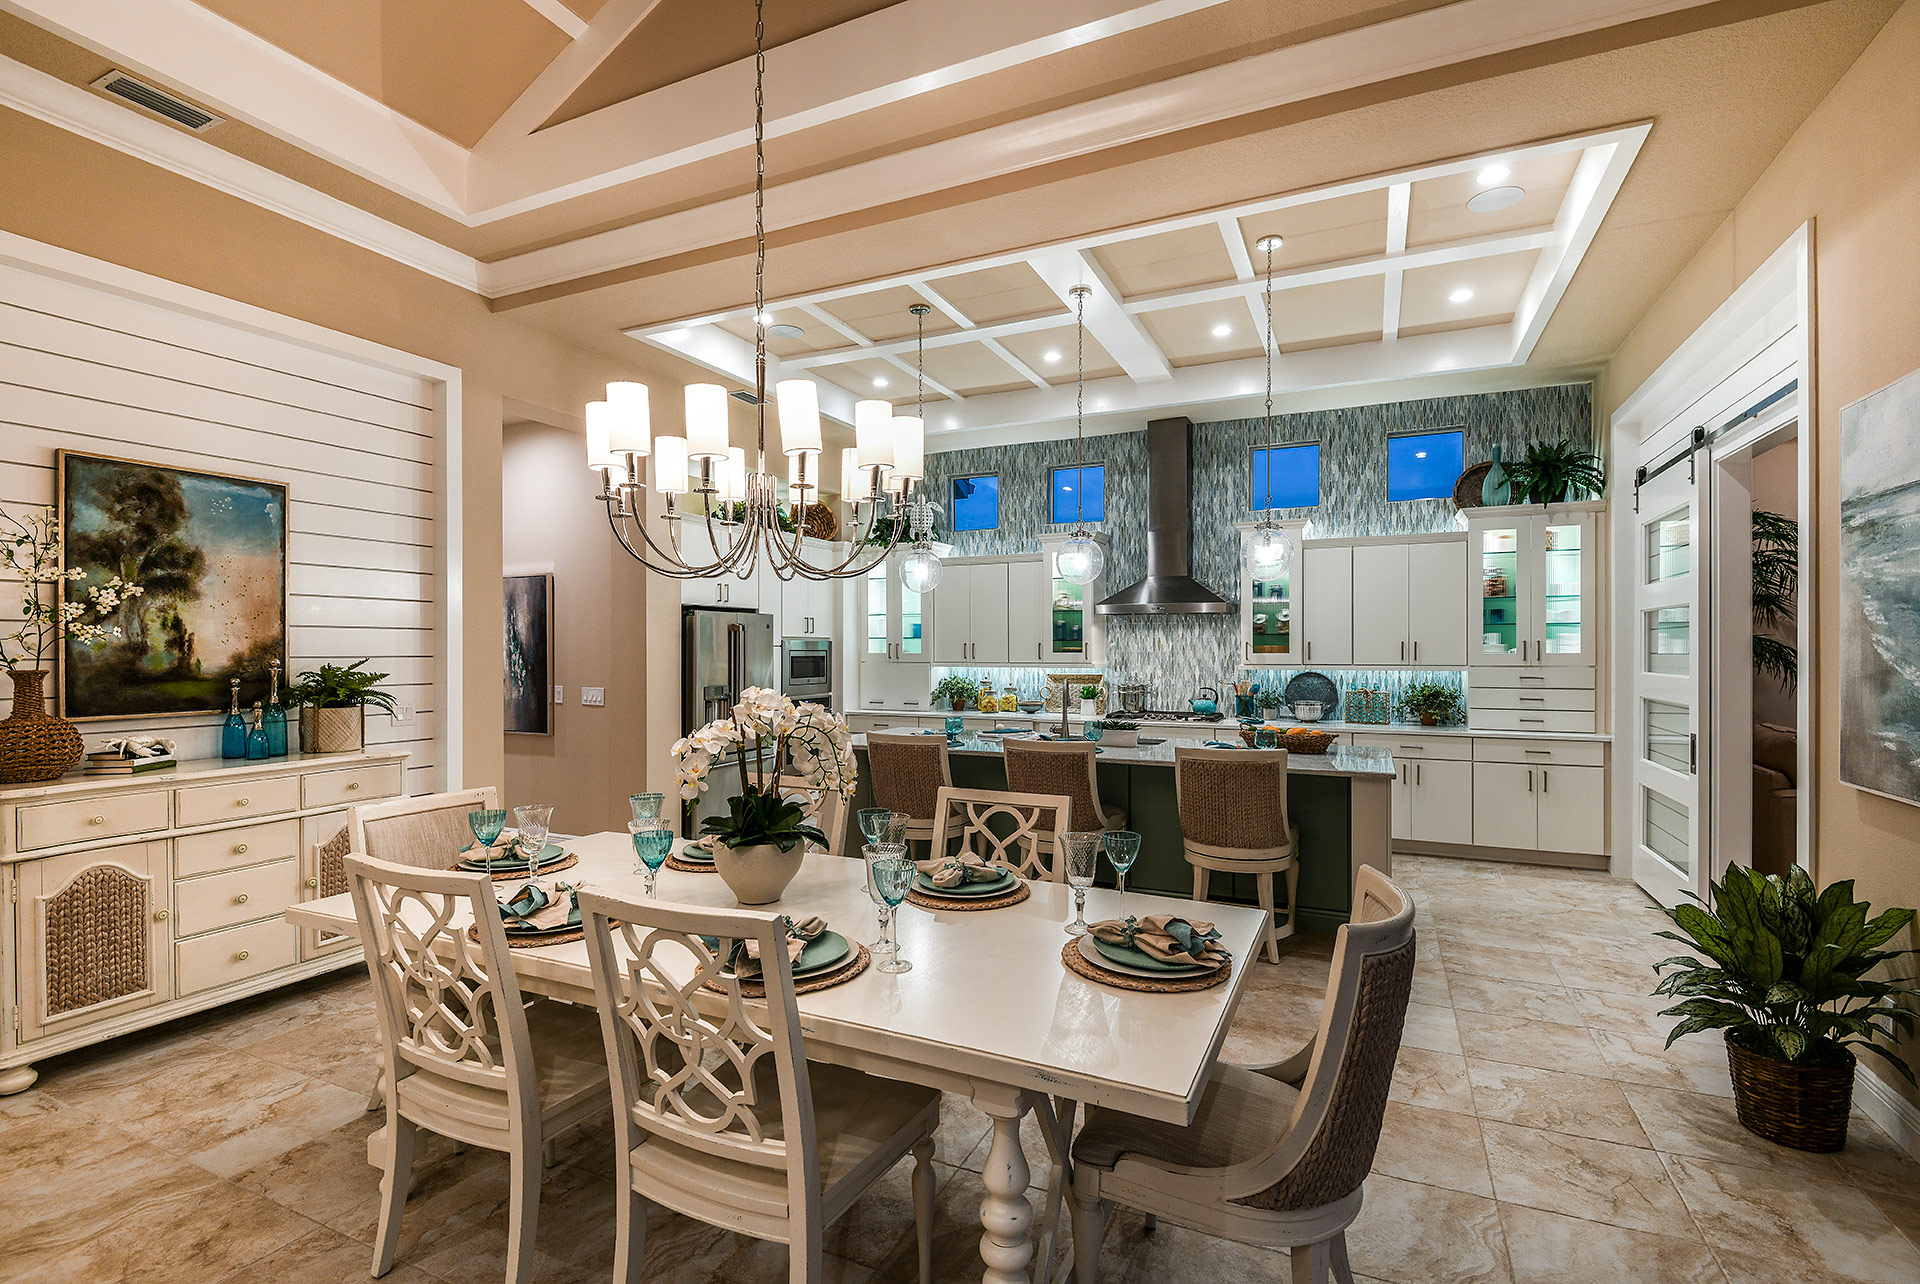 Lakehouse-Cove-Nautica-Dining-Room-Kitchen